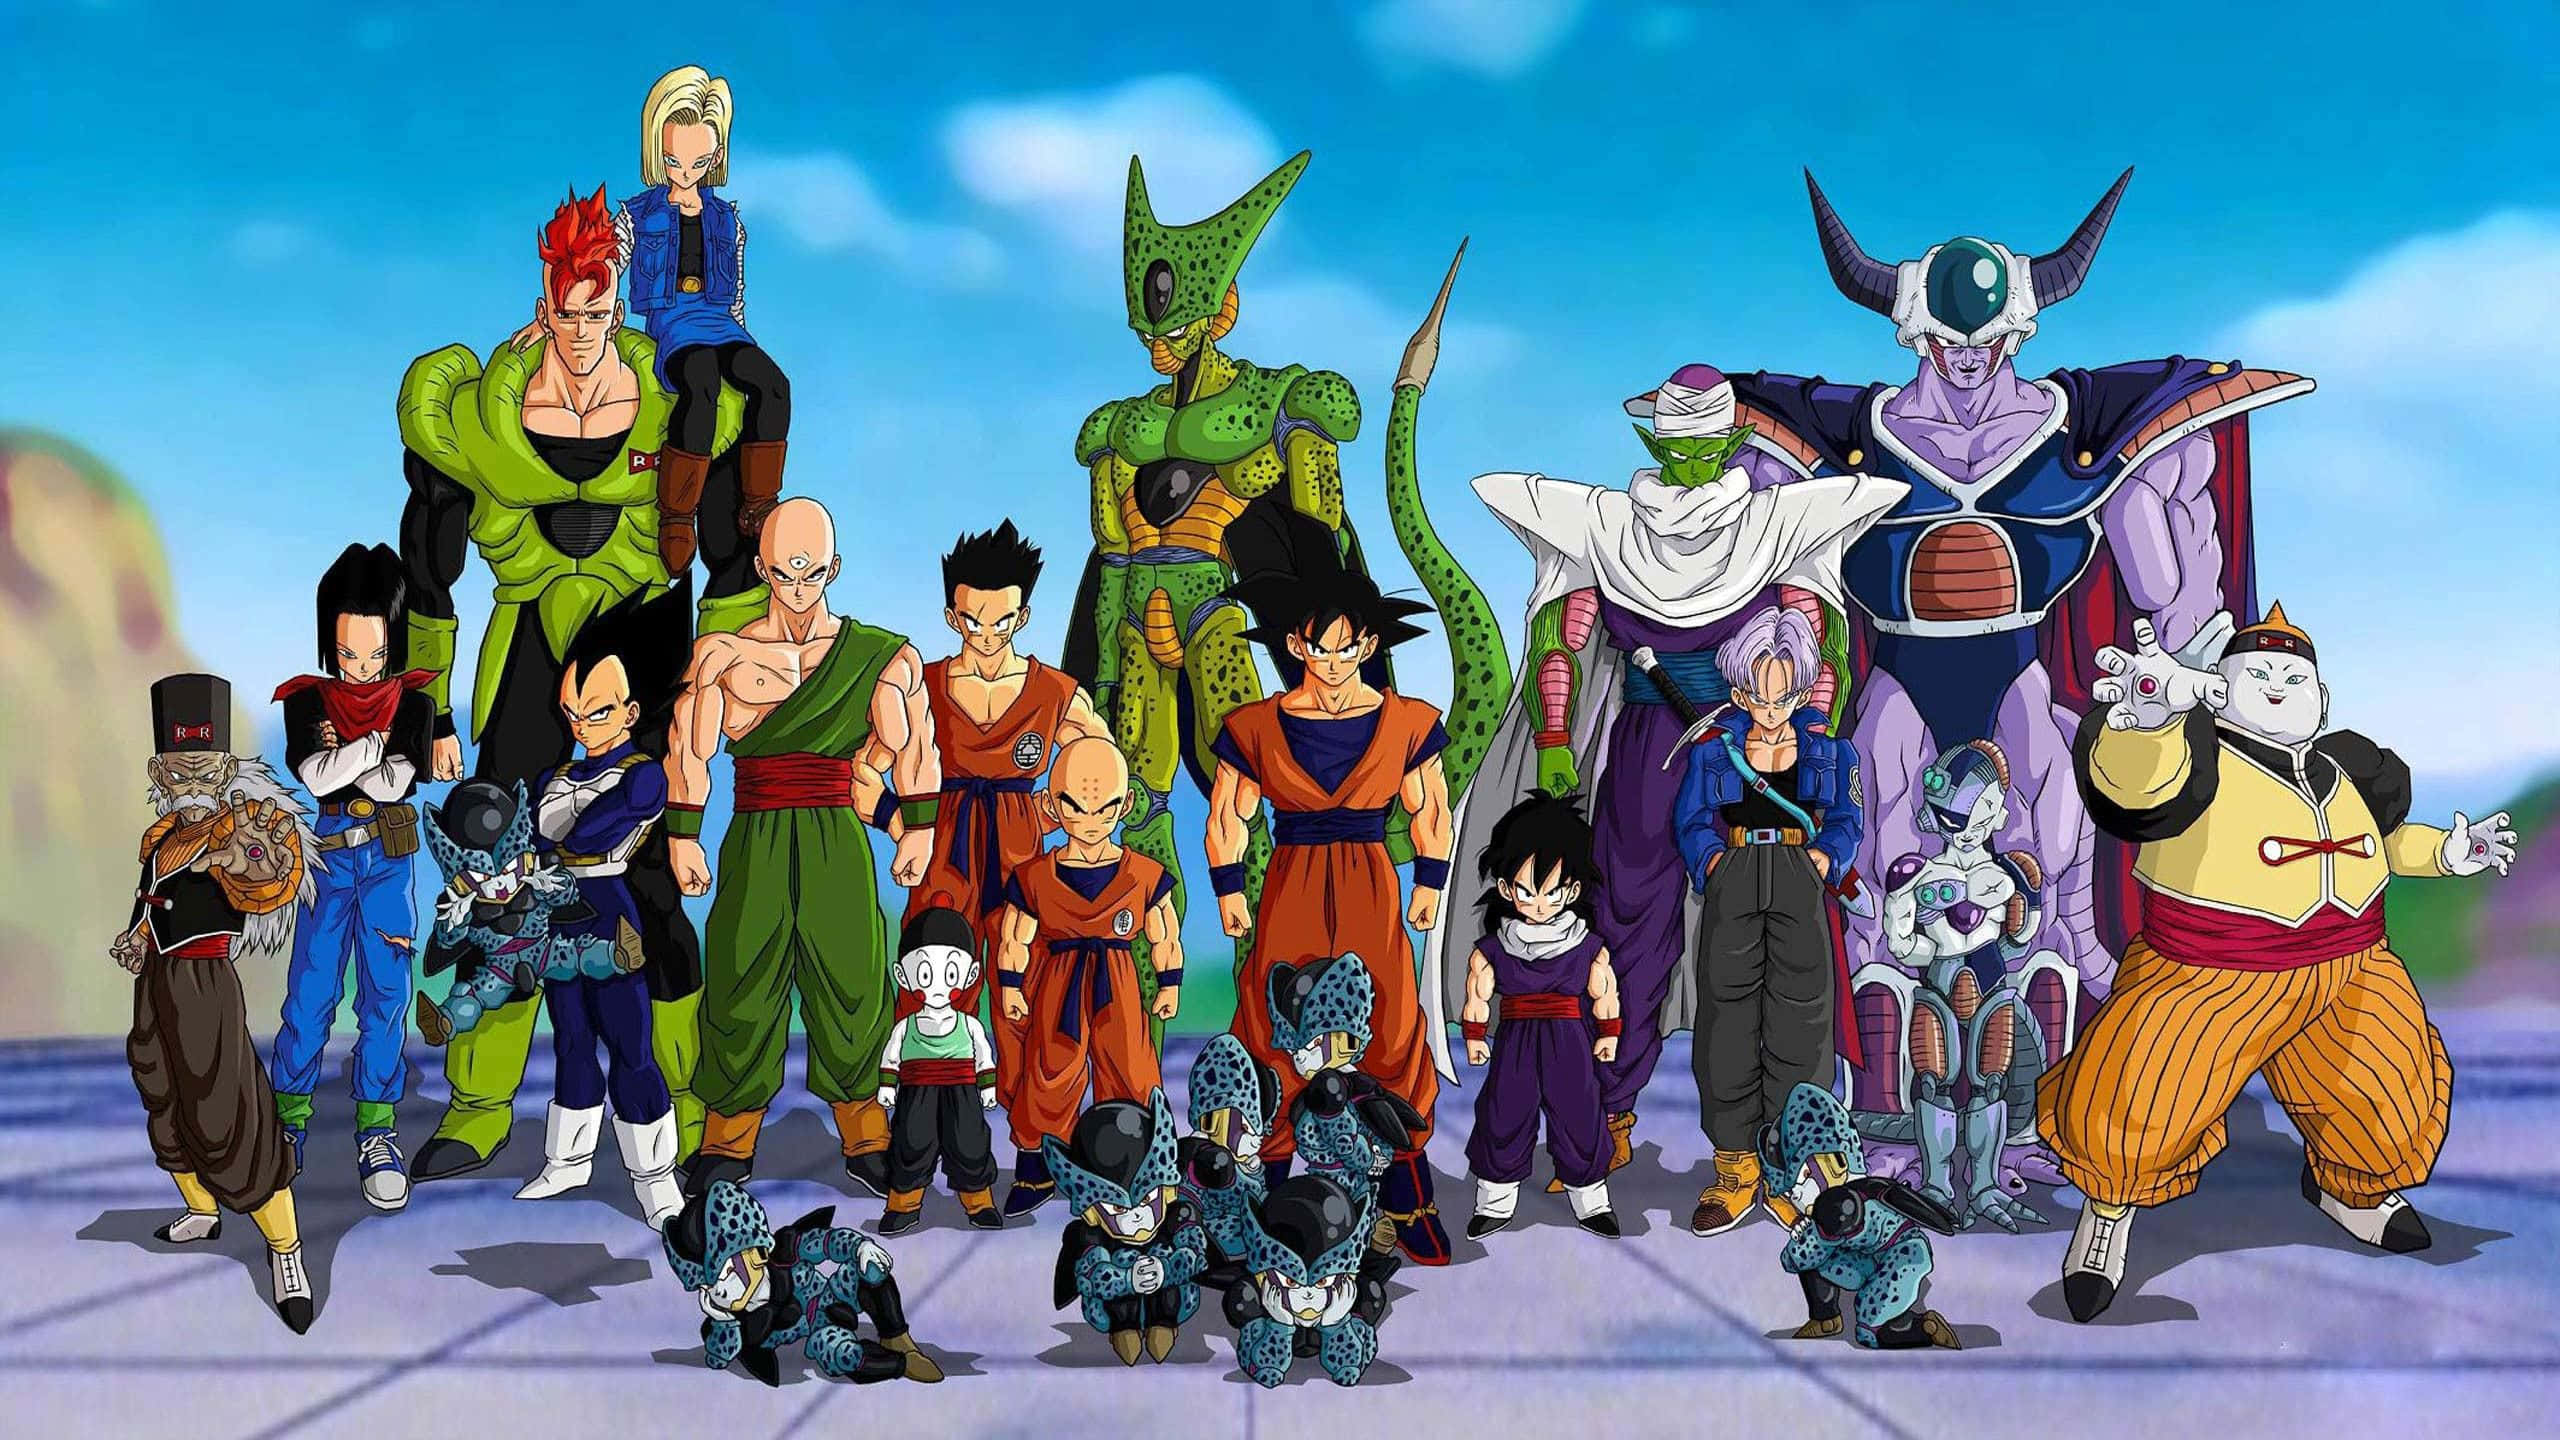 "The fighters of Dragon Ball Super stand together for a new chapter in heroic combat!"